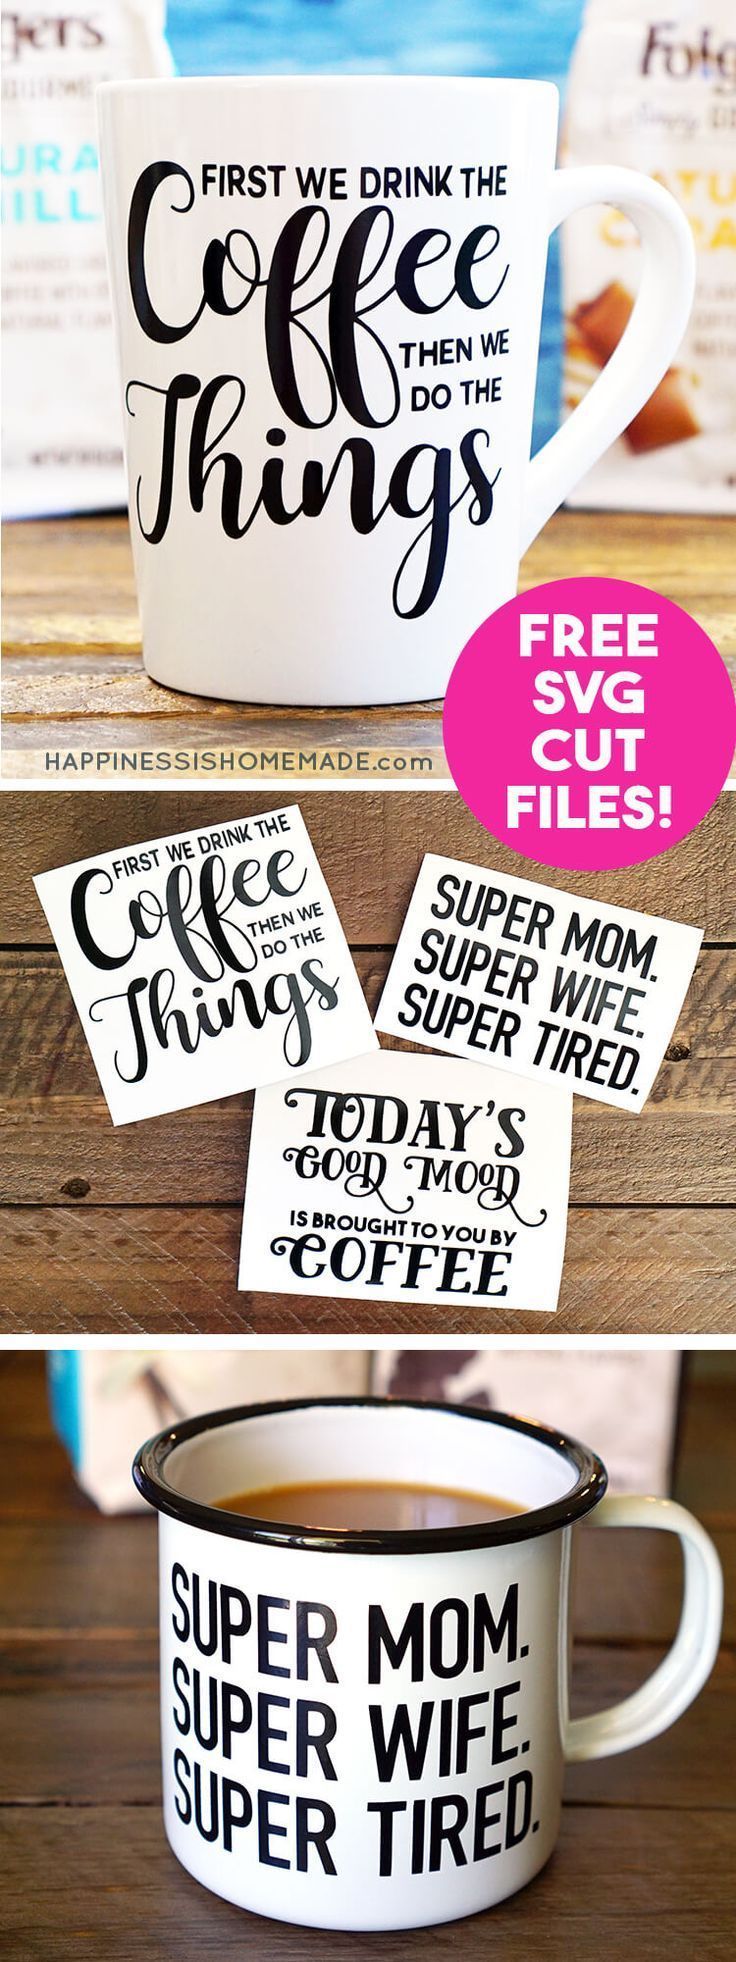 Make your own Funny Coffee Mugs with these free SVG cut files for your Cricut or Silhouette machine! Custom coffee mugs make a